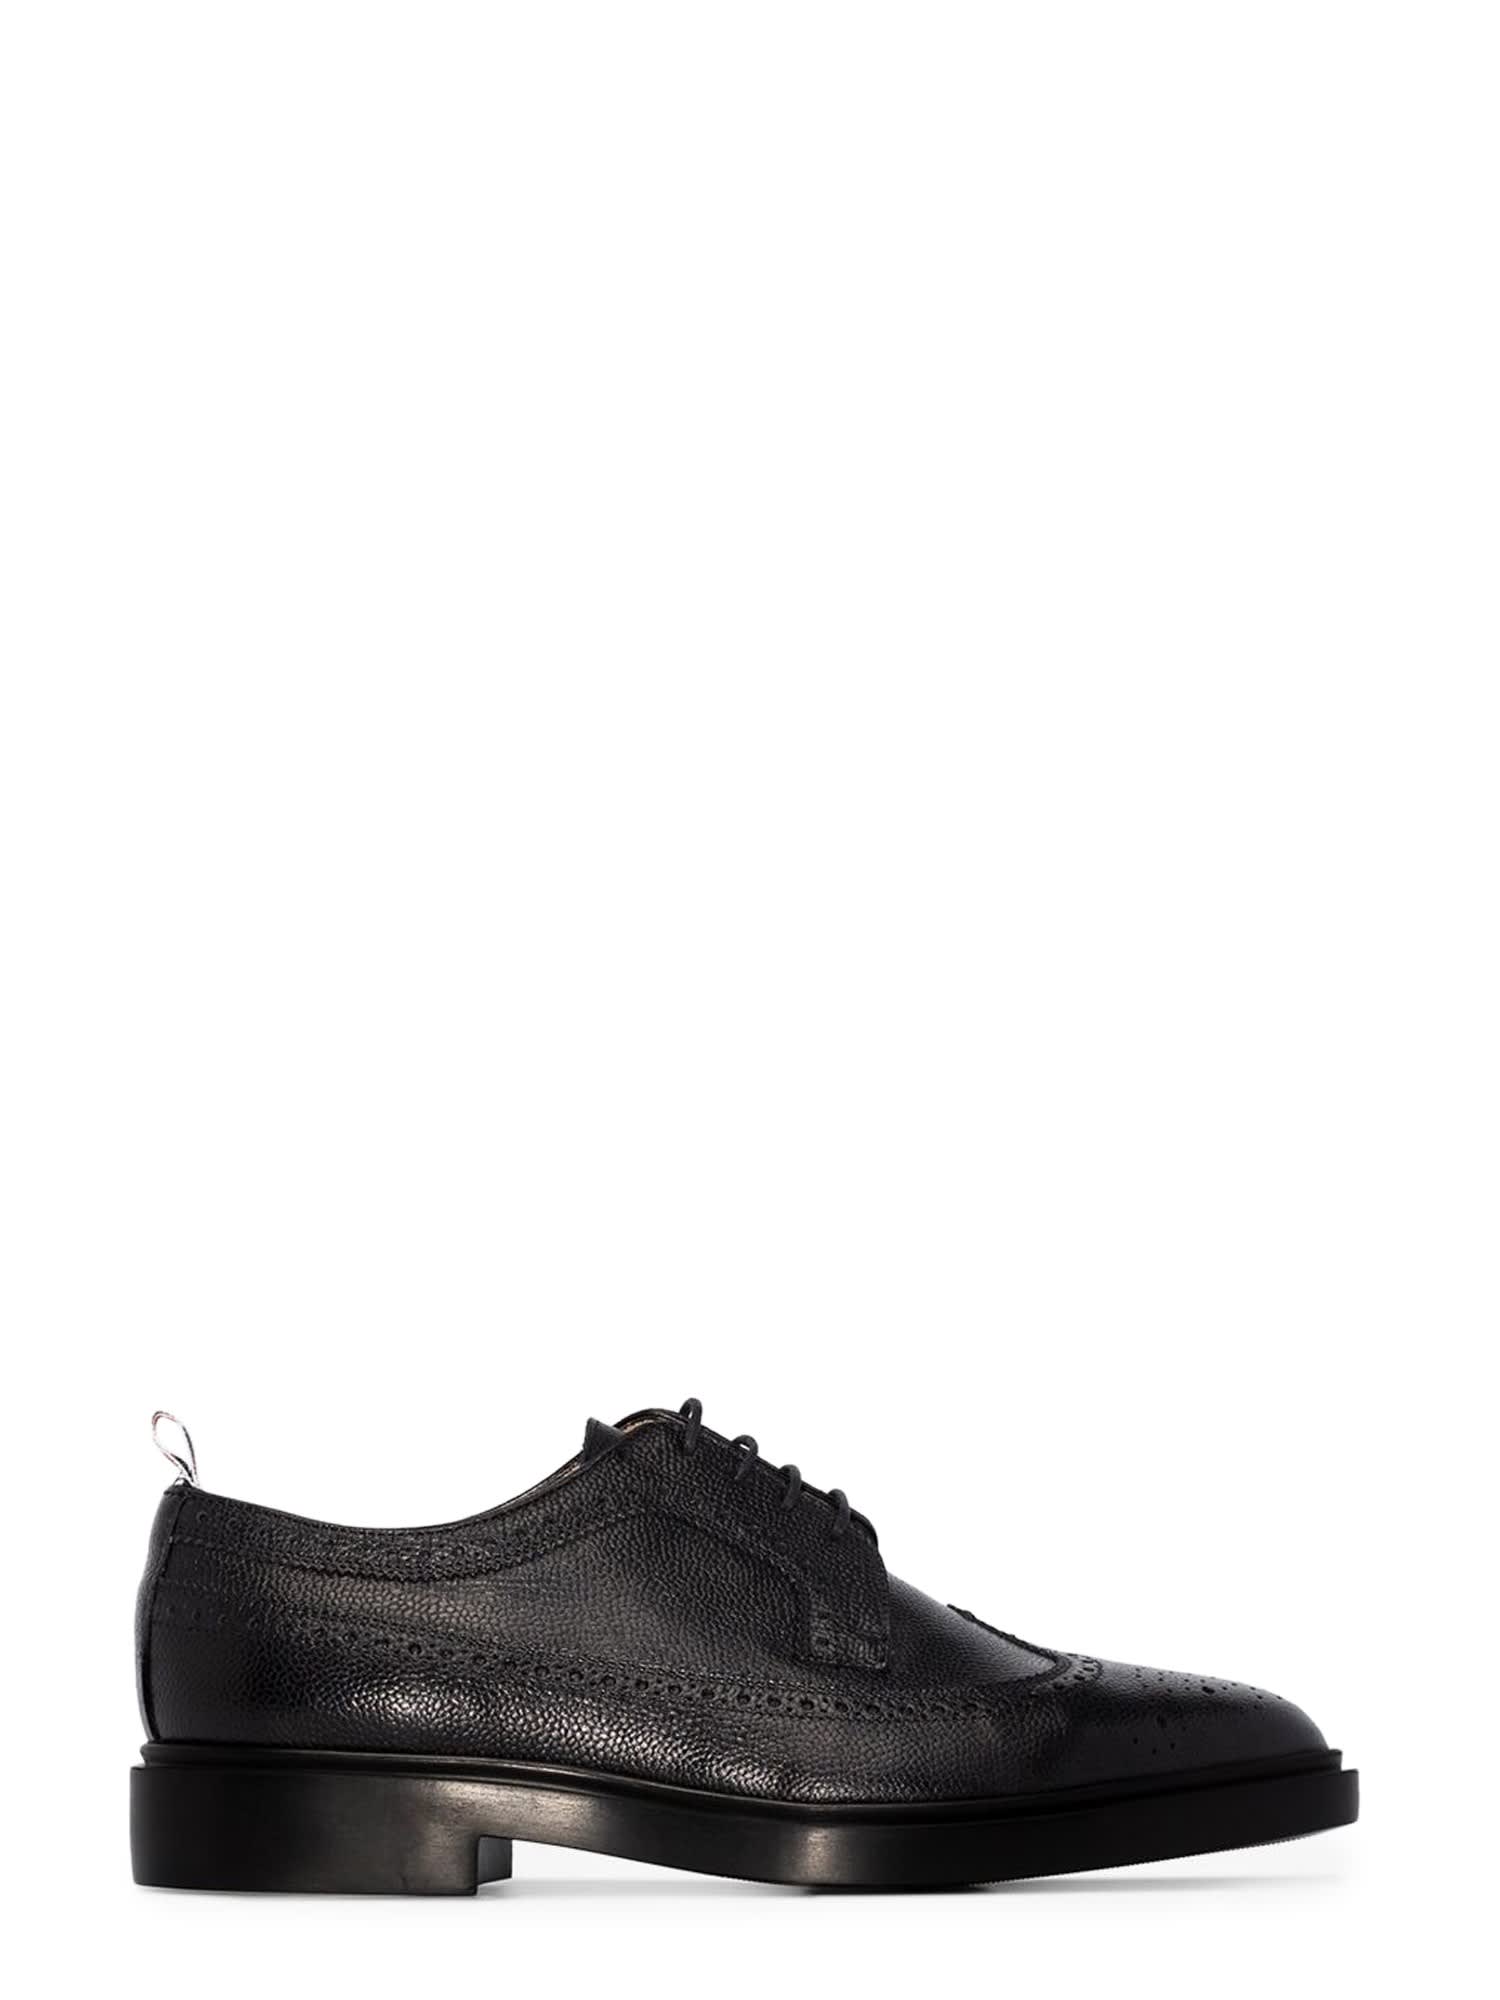 Thom Browne Long Wing Brogue Lace Up